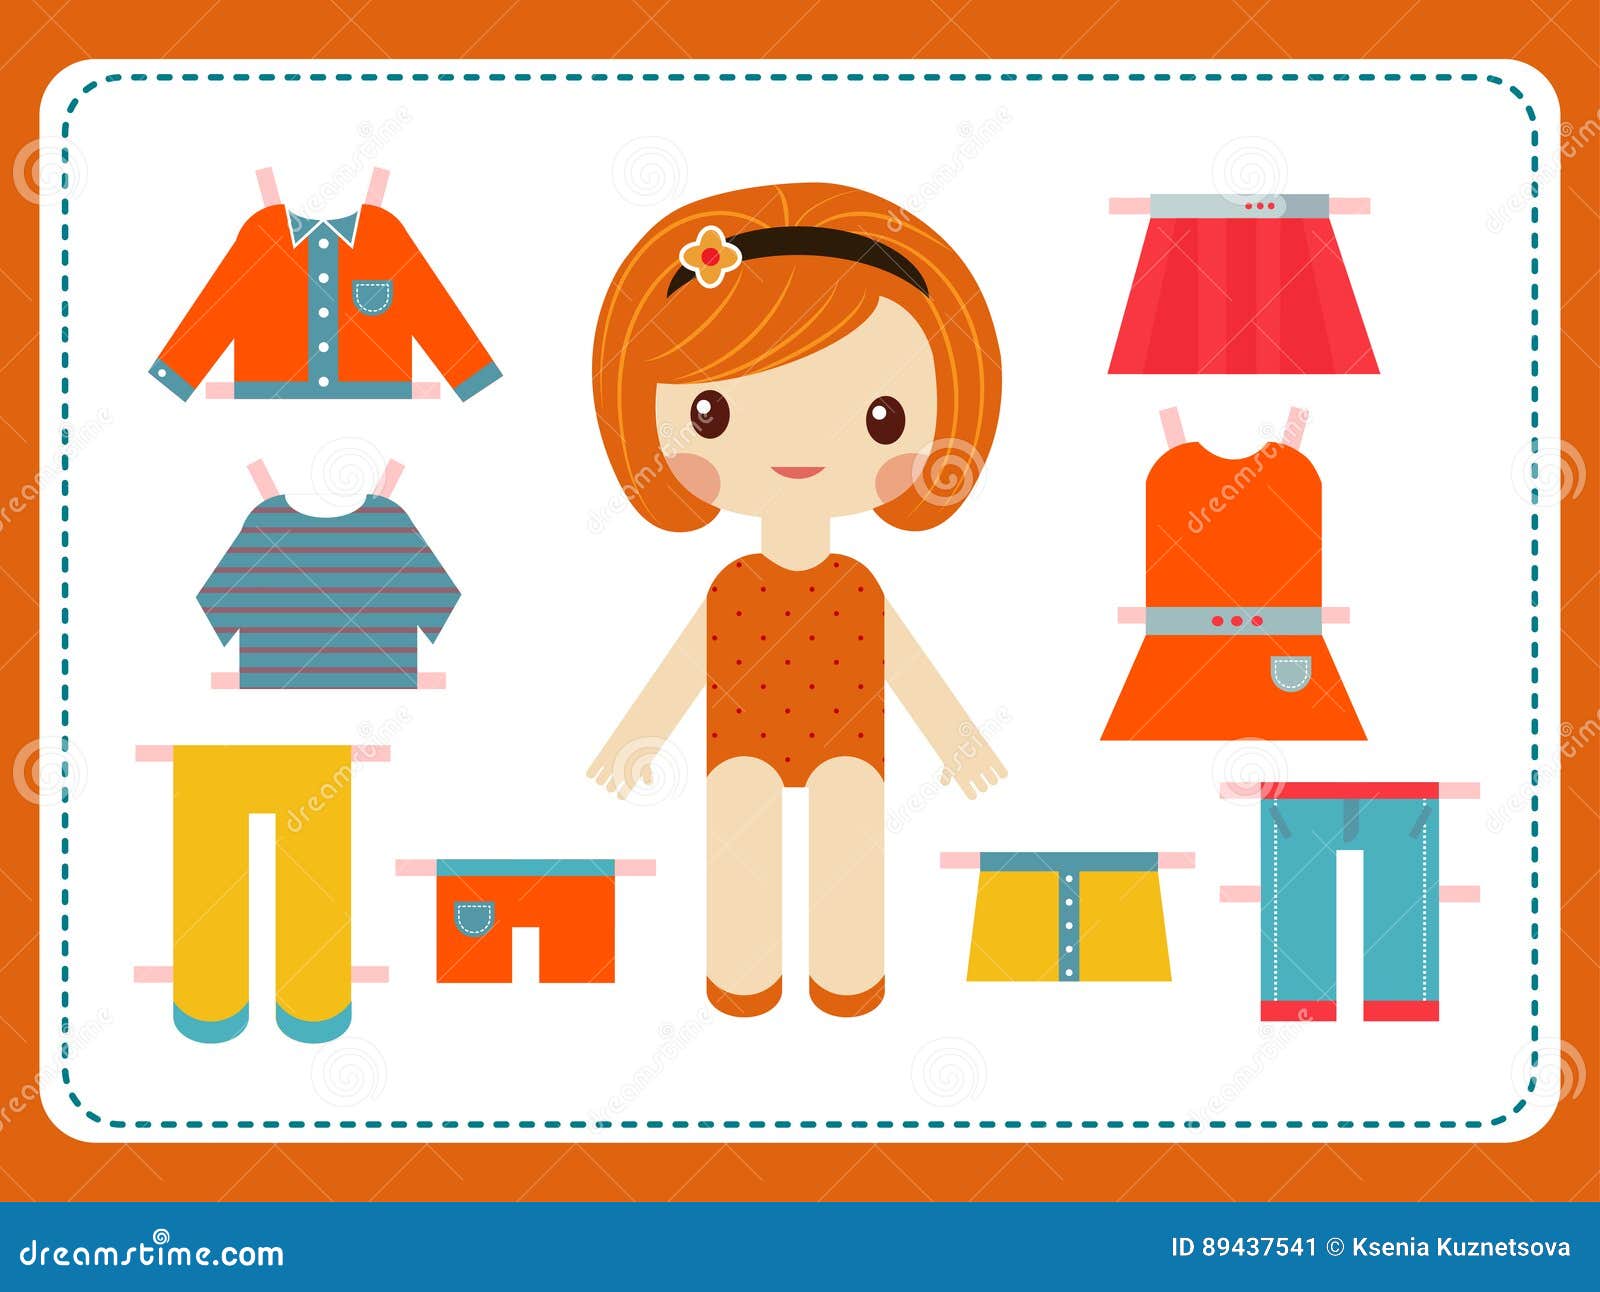 Cute Female Paper Doll with the Variety of Bright Colorful Clothes ...